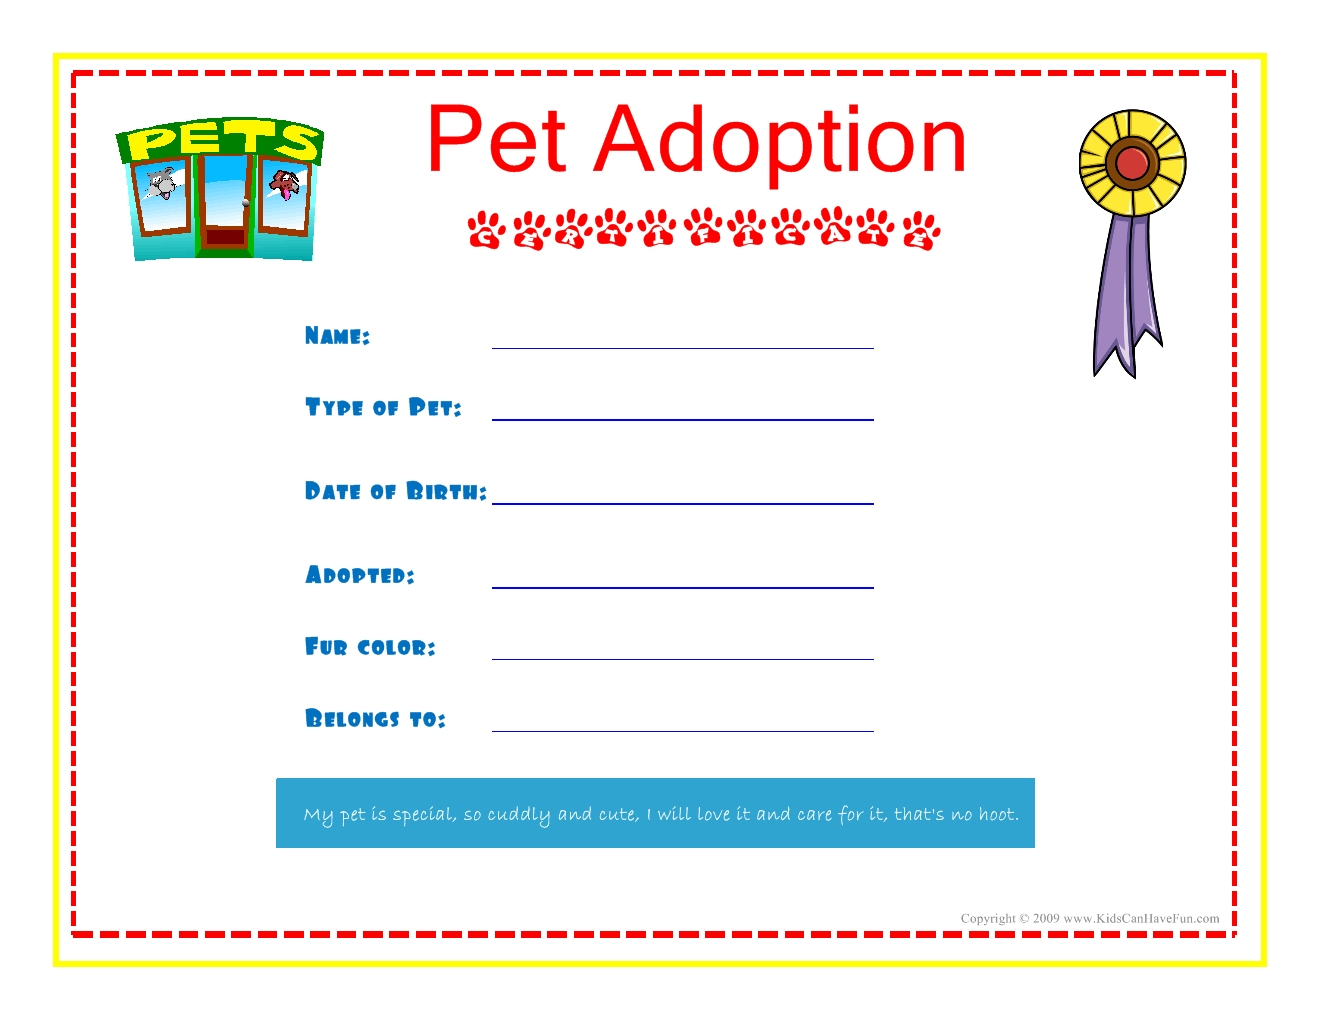 Adoption Certificate Template Fast Pet Adoption Certificate For The - Free Printable Stuffed Animal Adoption Certificate